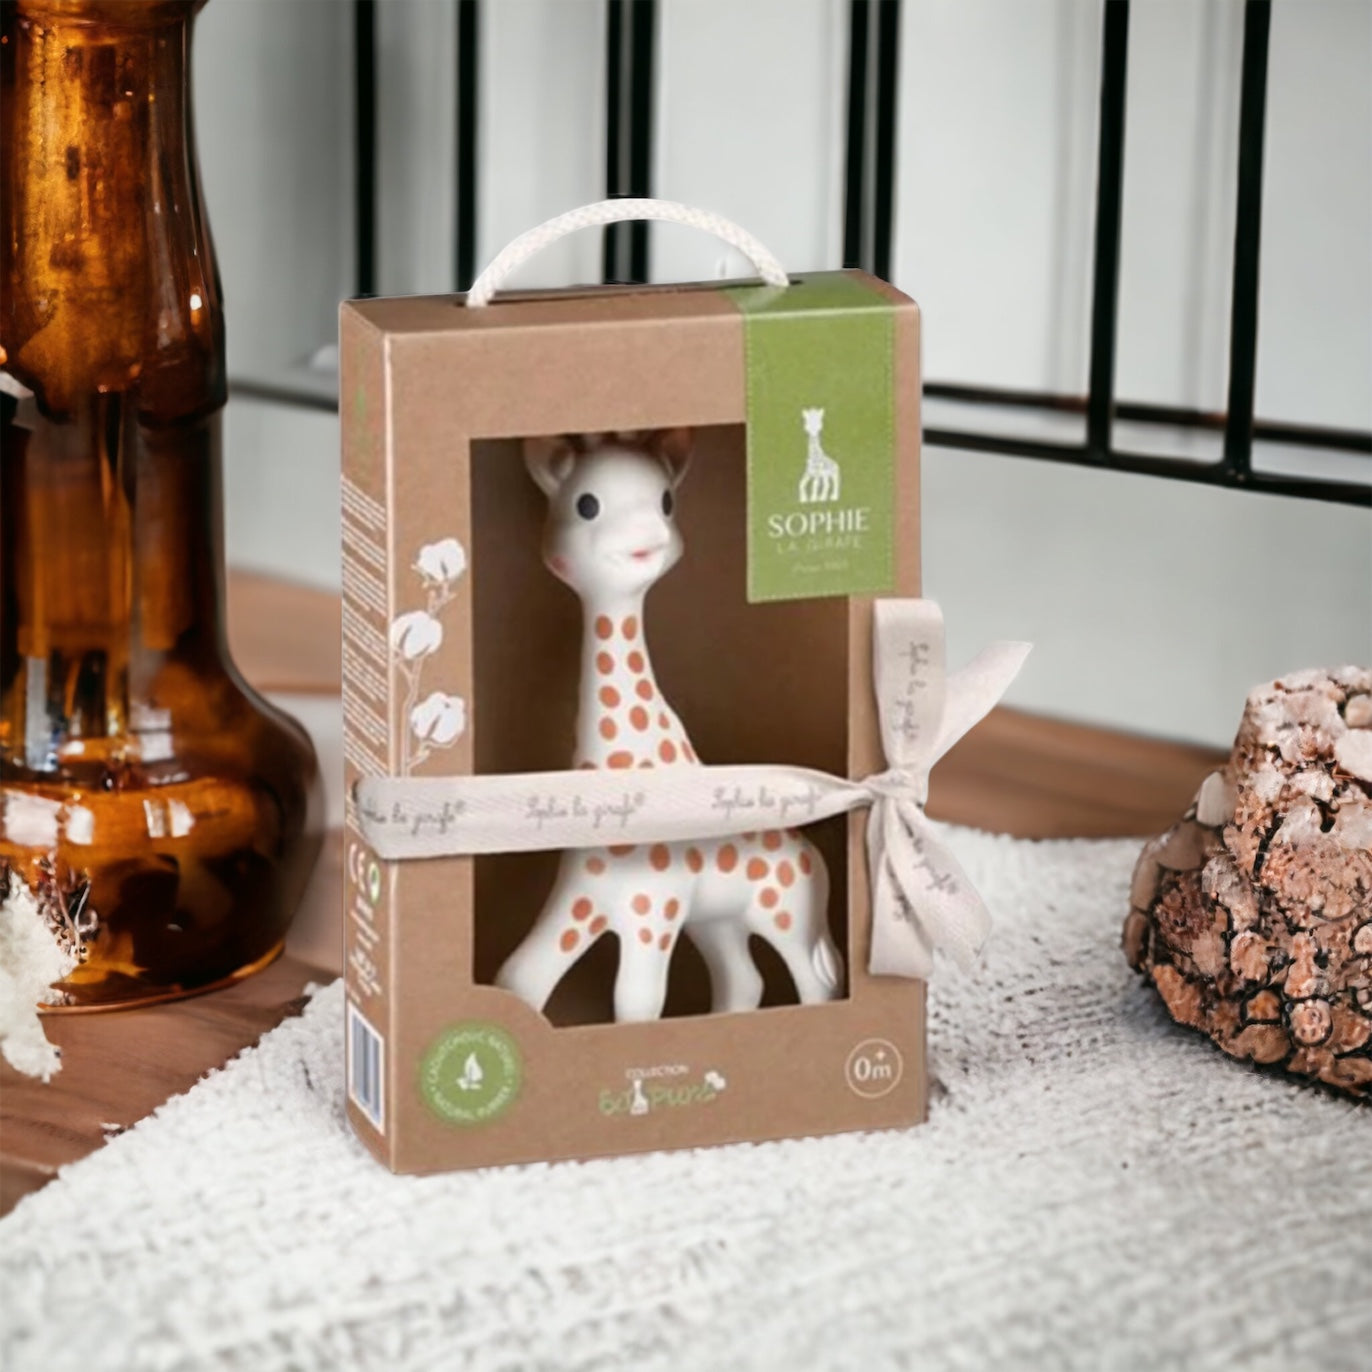 New Baby and Parent Hamper: Iconic Sophie the Giraffe and Treats